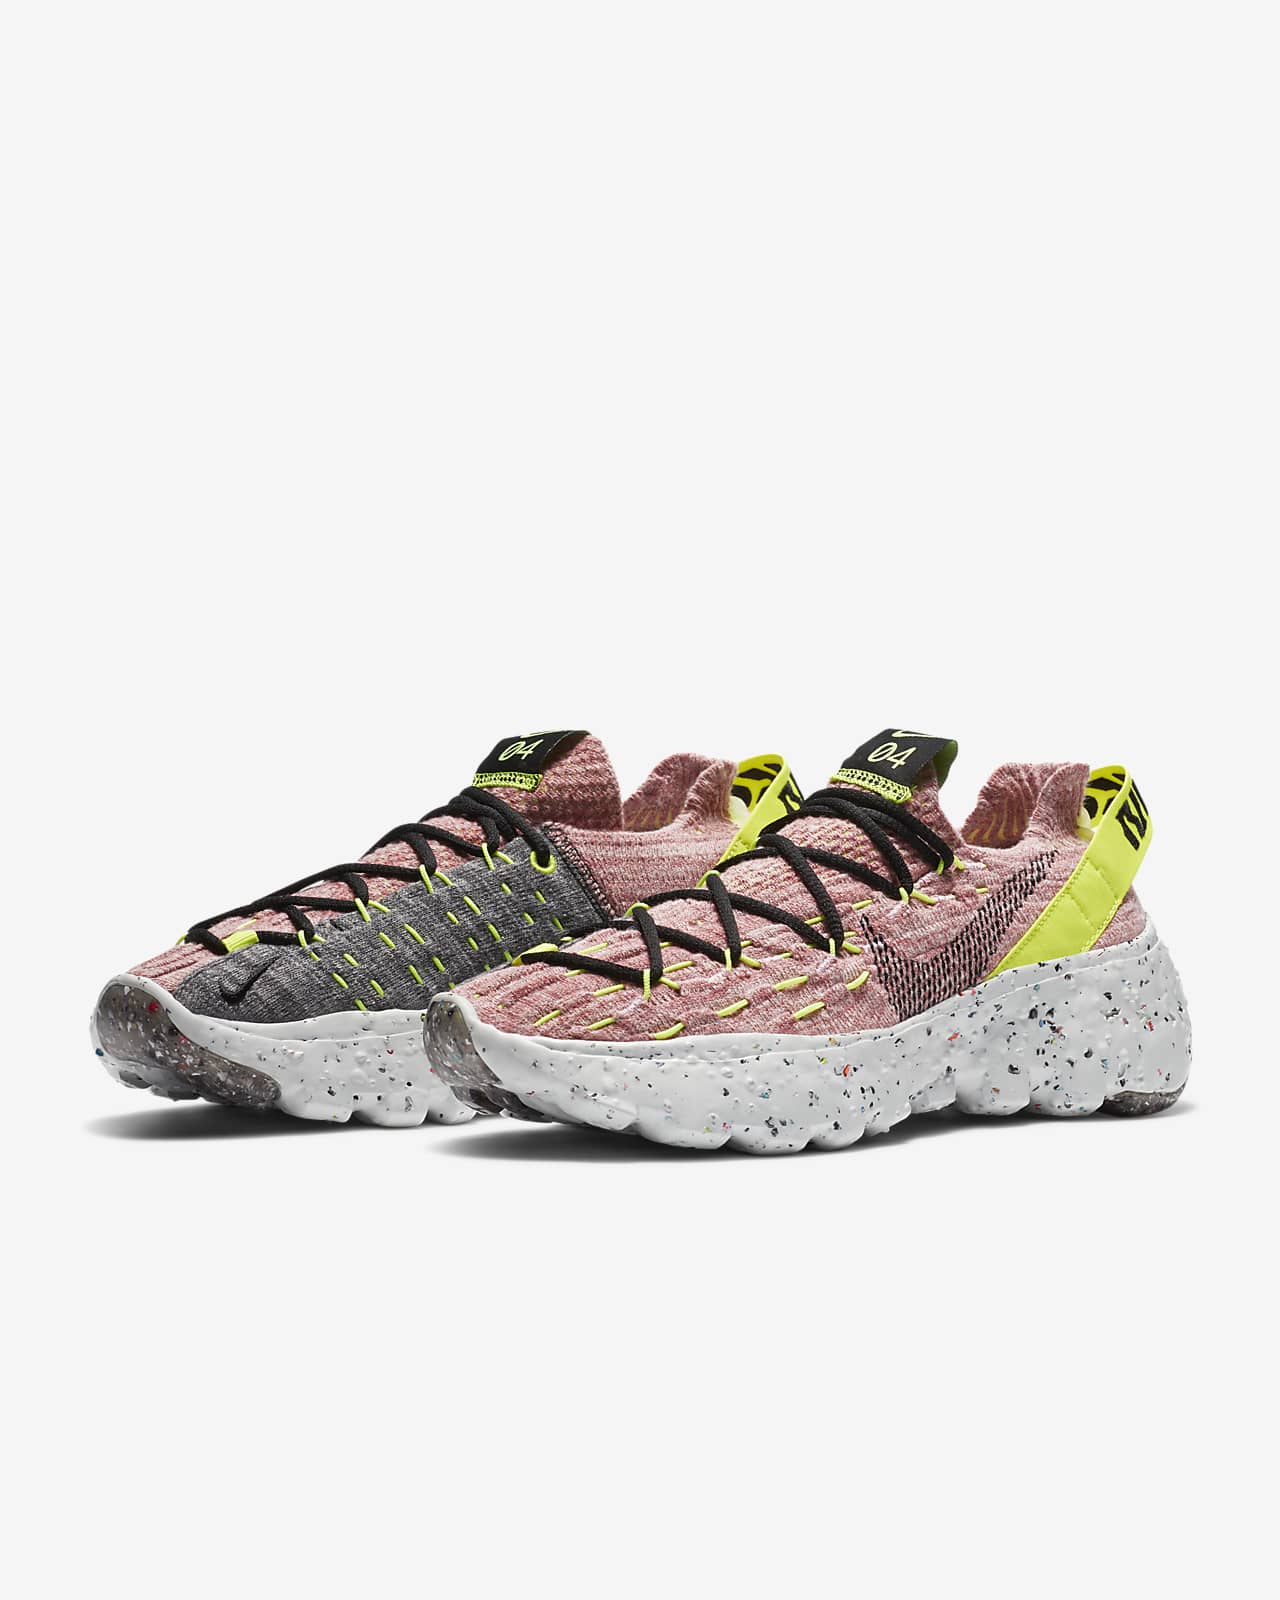 nike space hippie pink